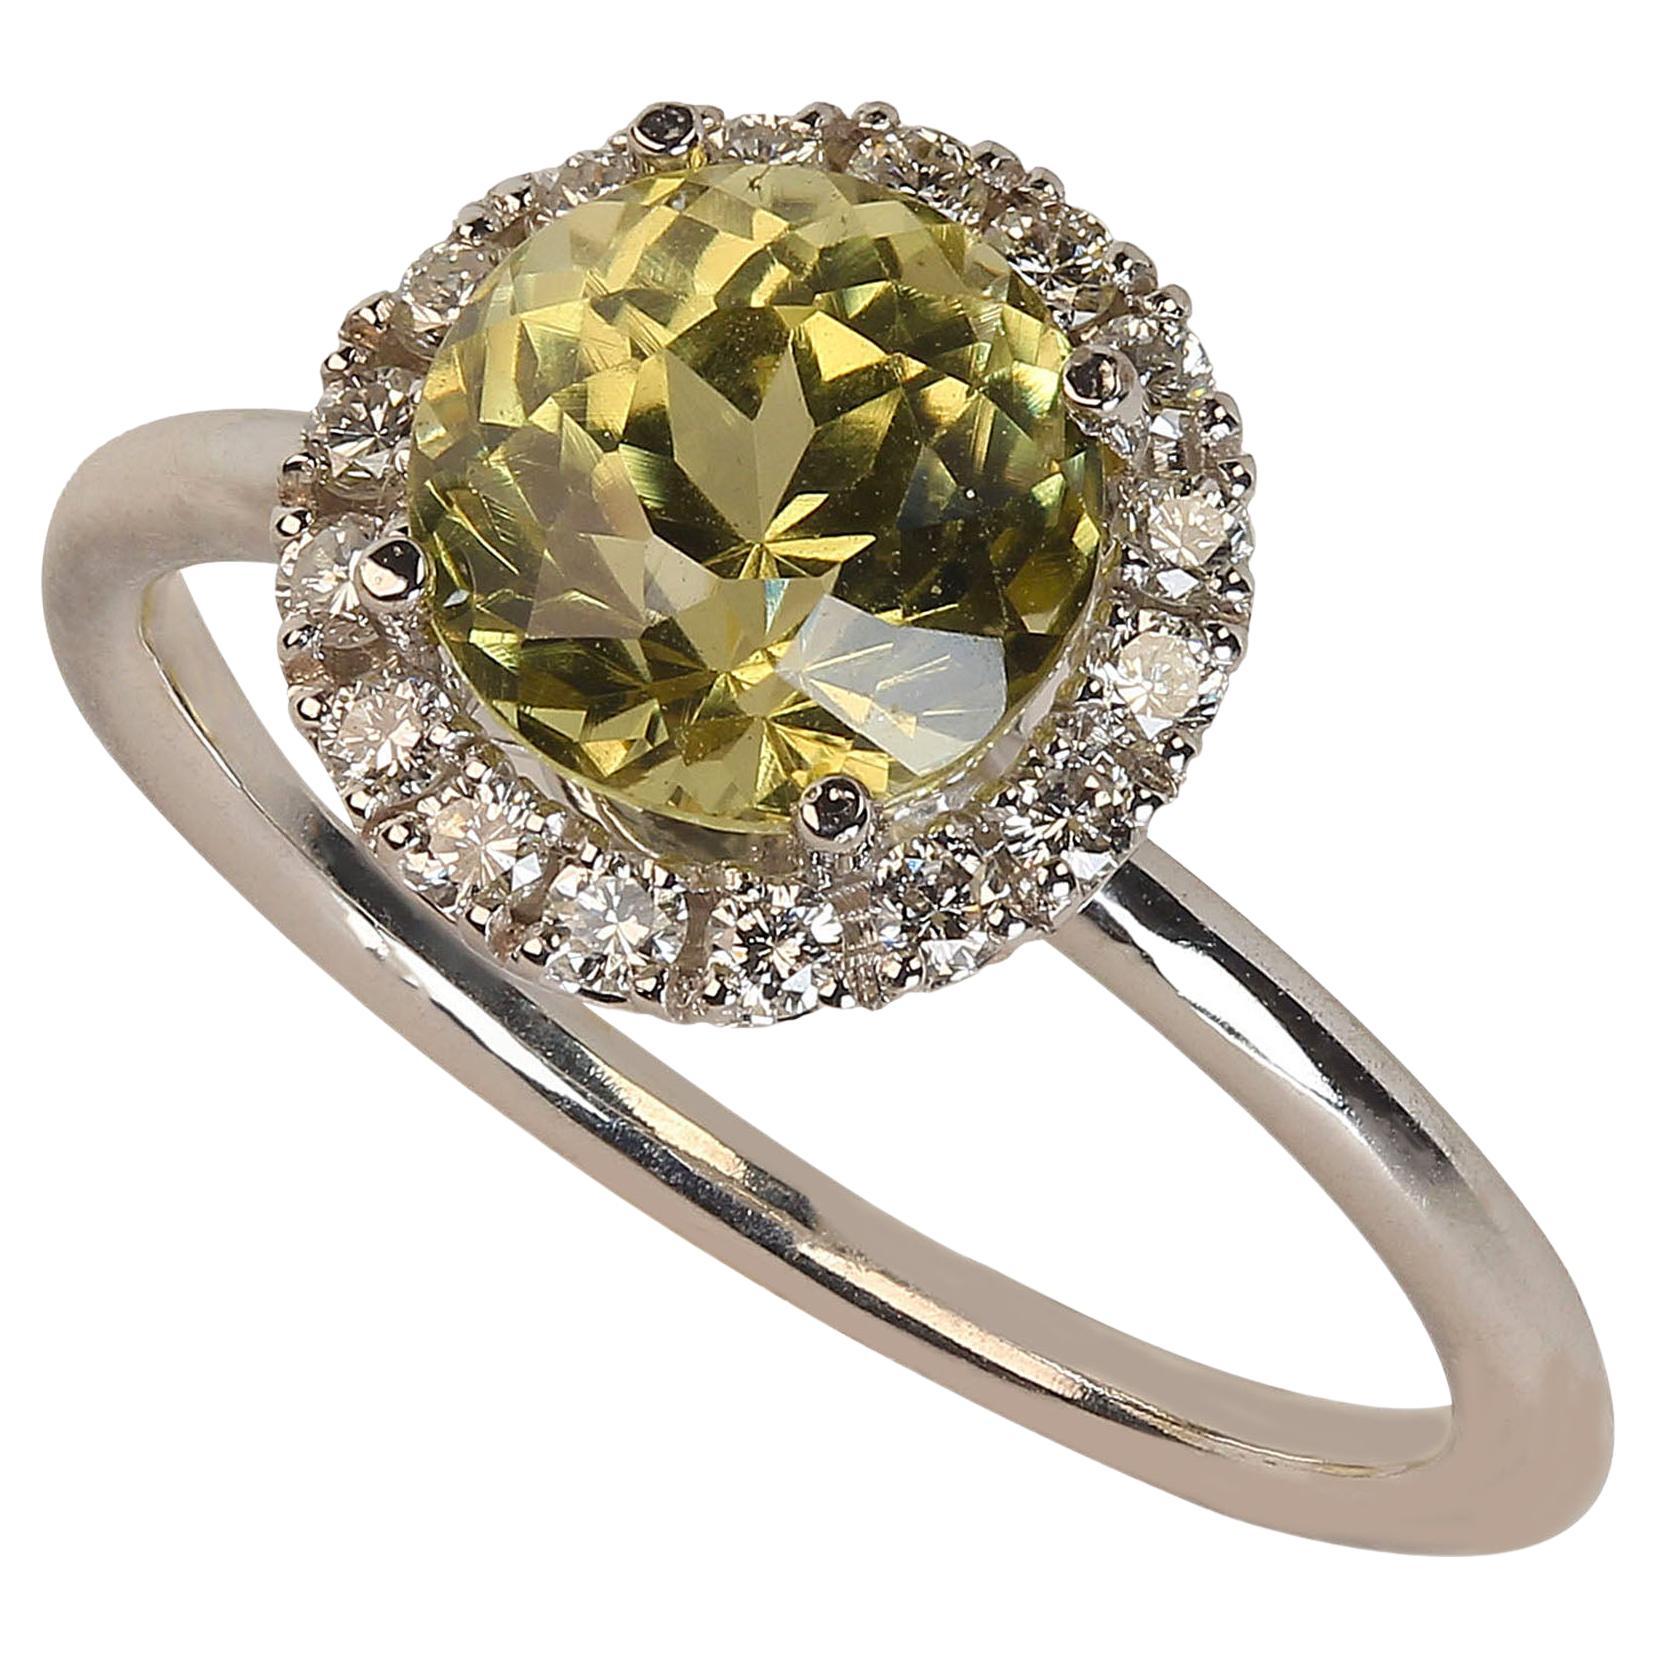 AJD Sparkling Yellow Chrysoberyl in a Diamond Halo 14K White Gold Ring